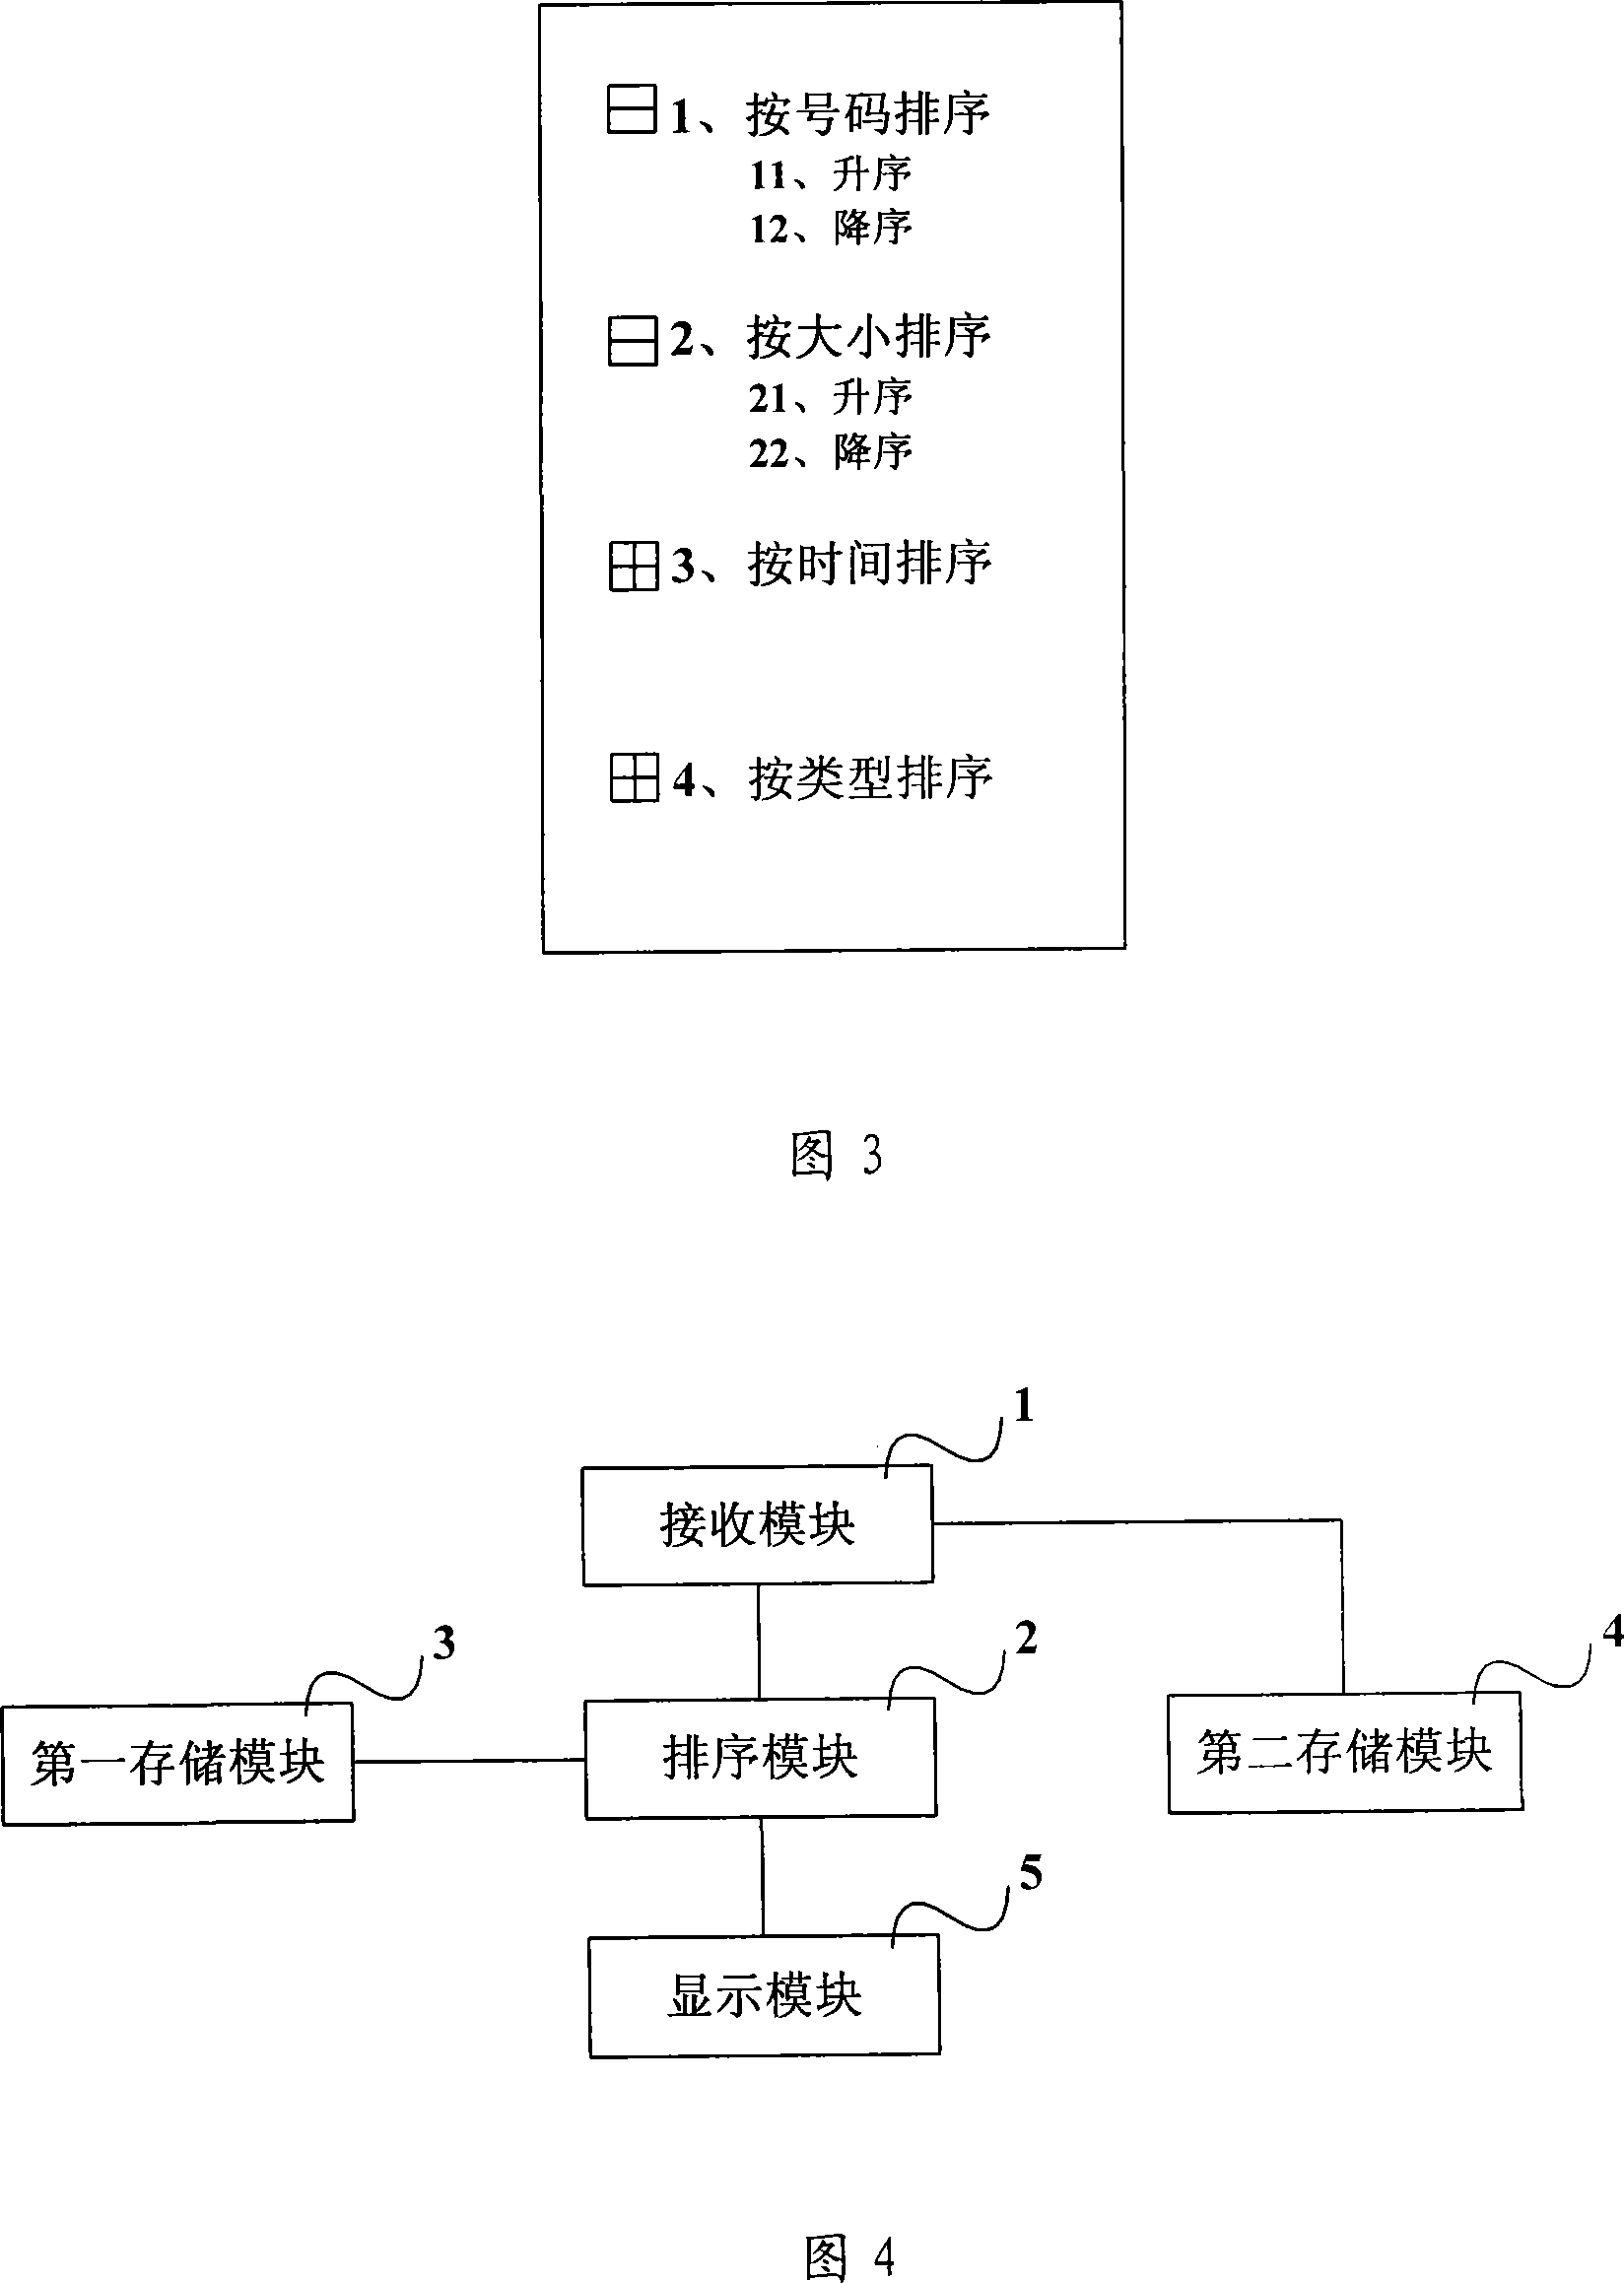 Short message processing method and mobile terminal